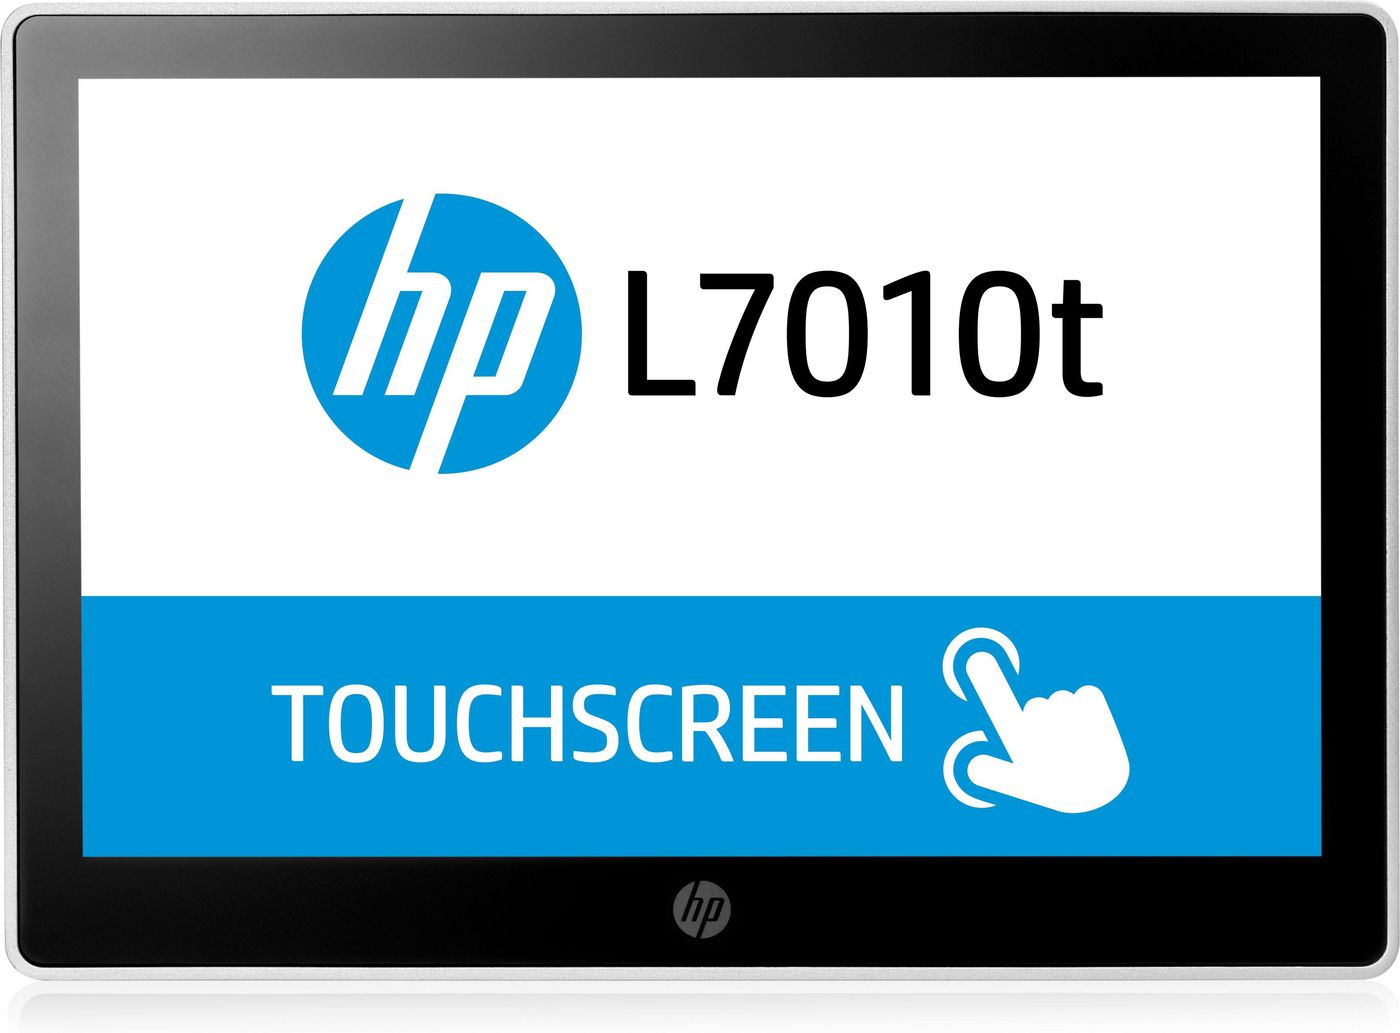 HP 7010t Touch Monitor